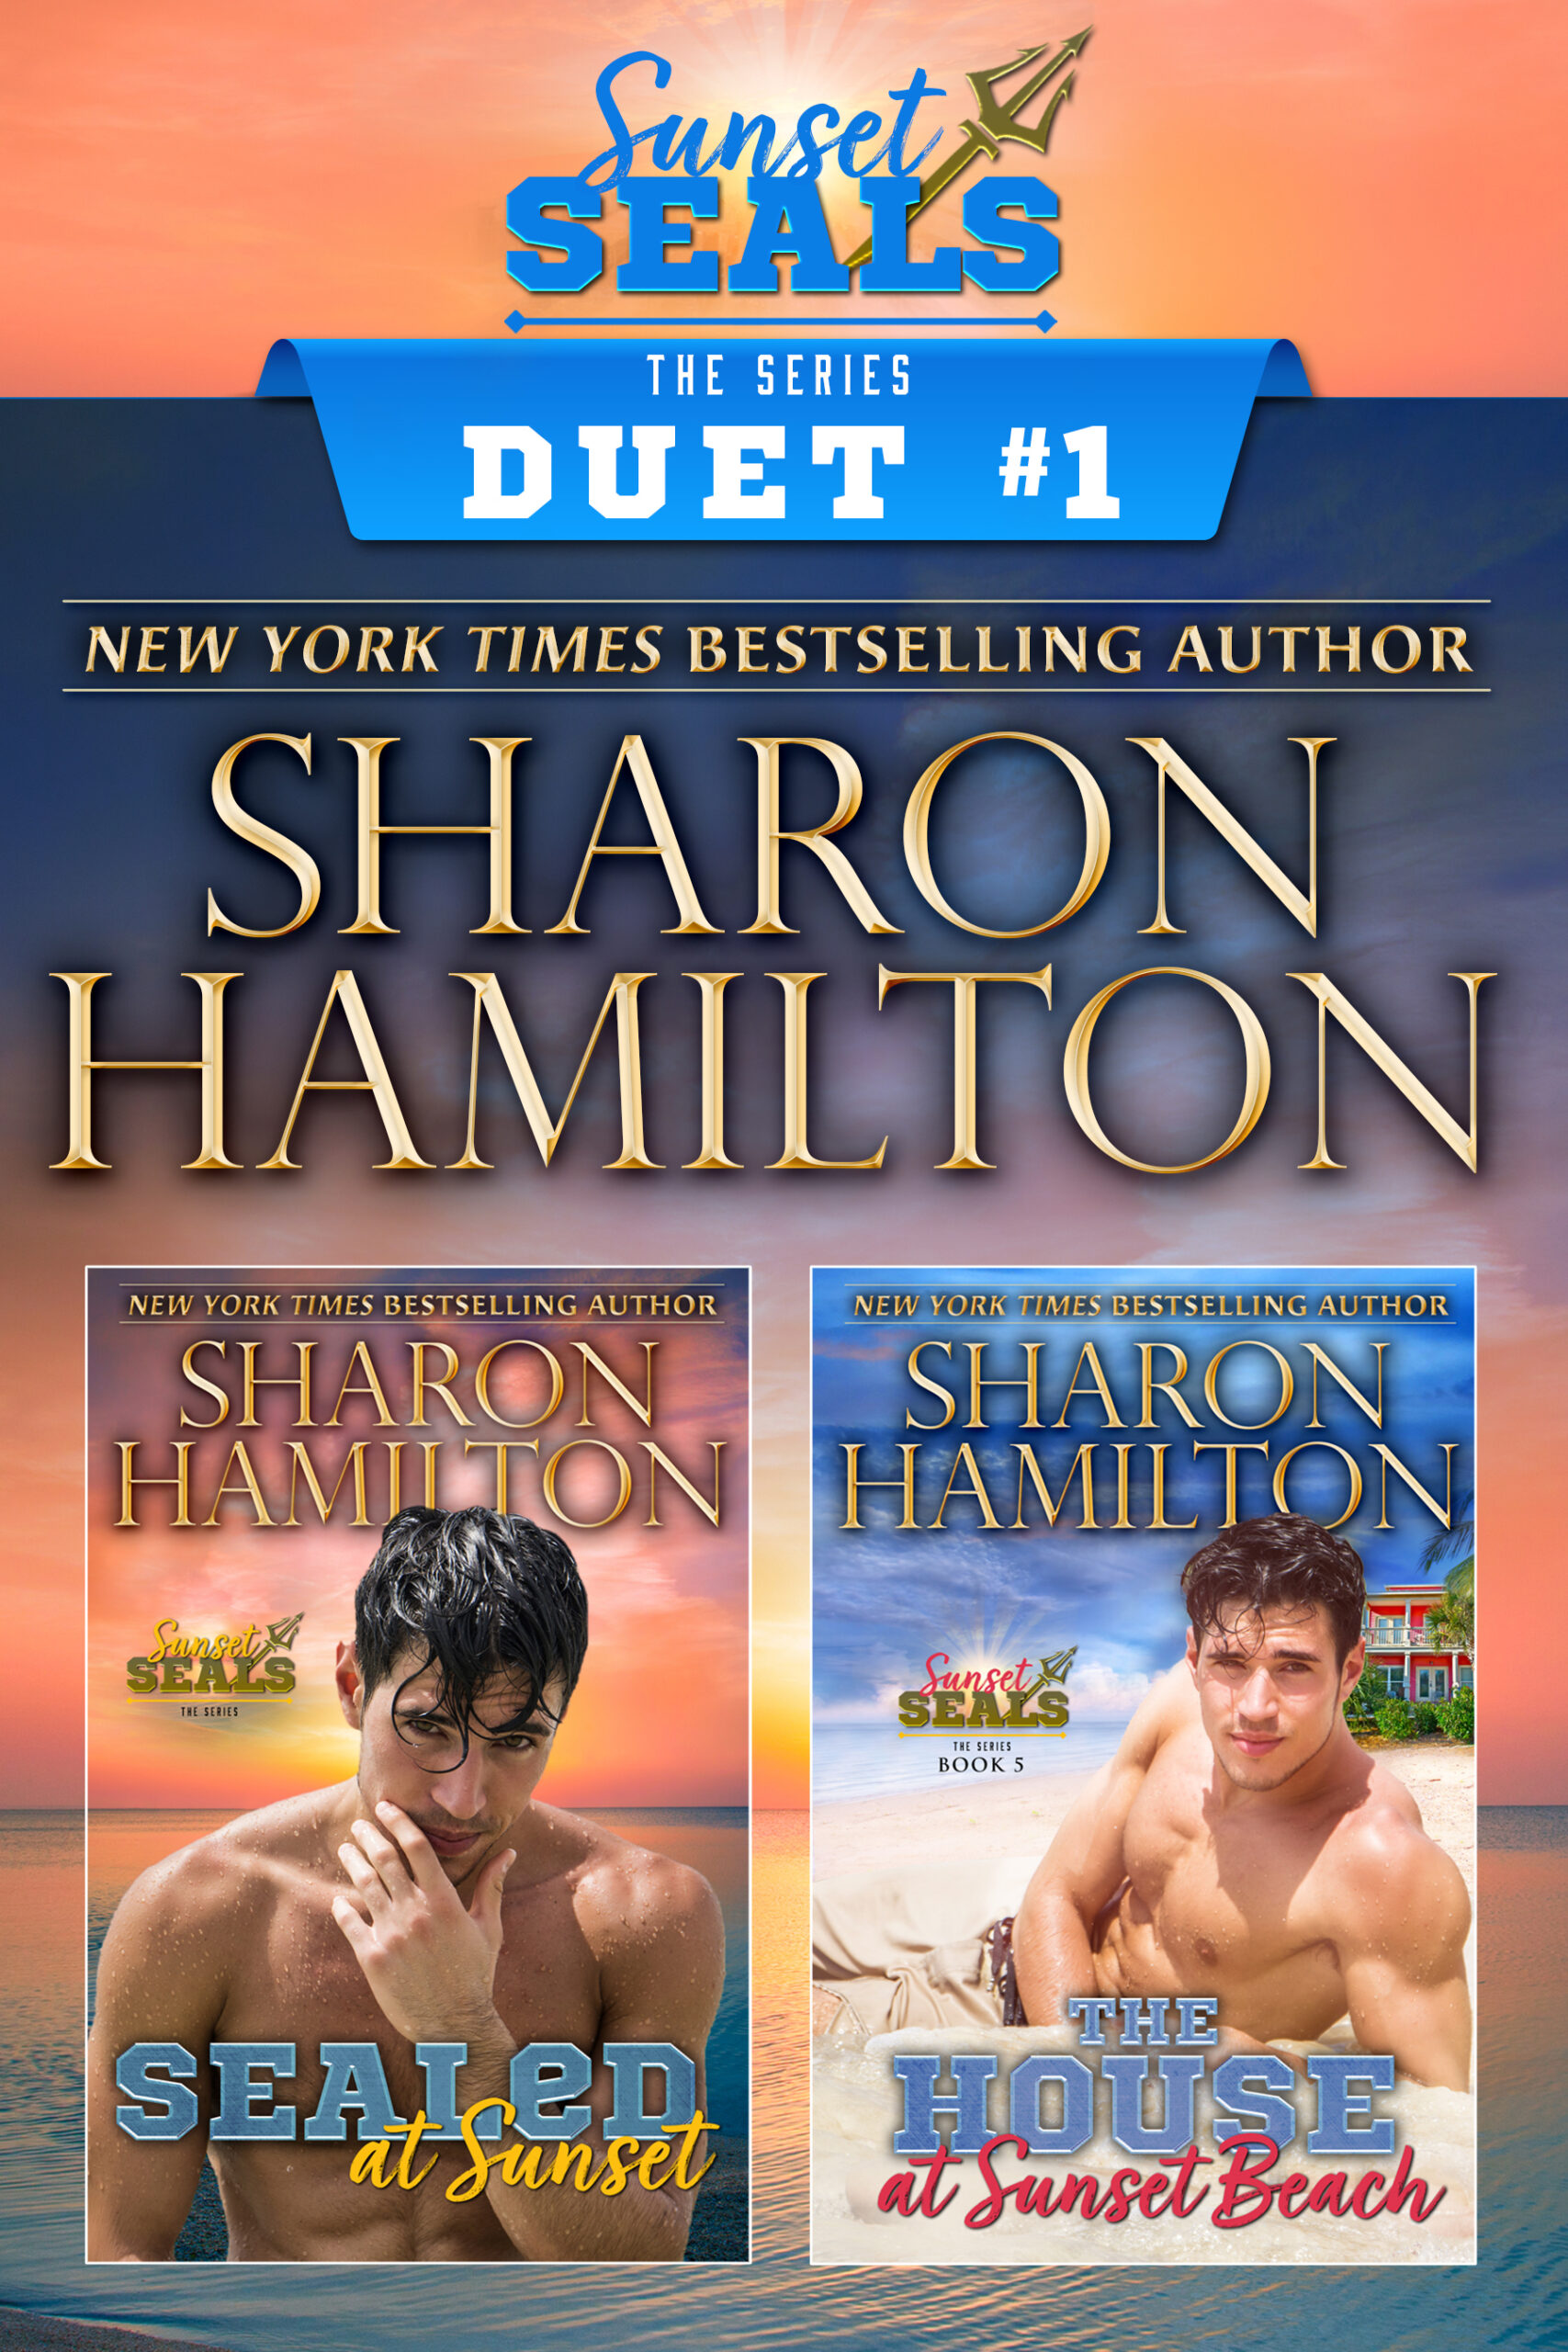 Sunset Seal Duet #1 Book Collection by Author Sharon Hamilton